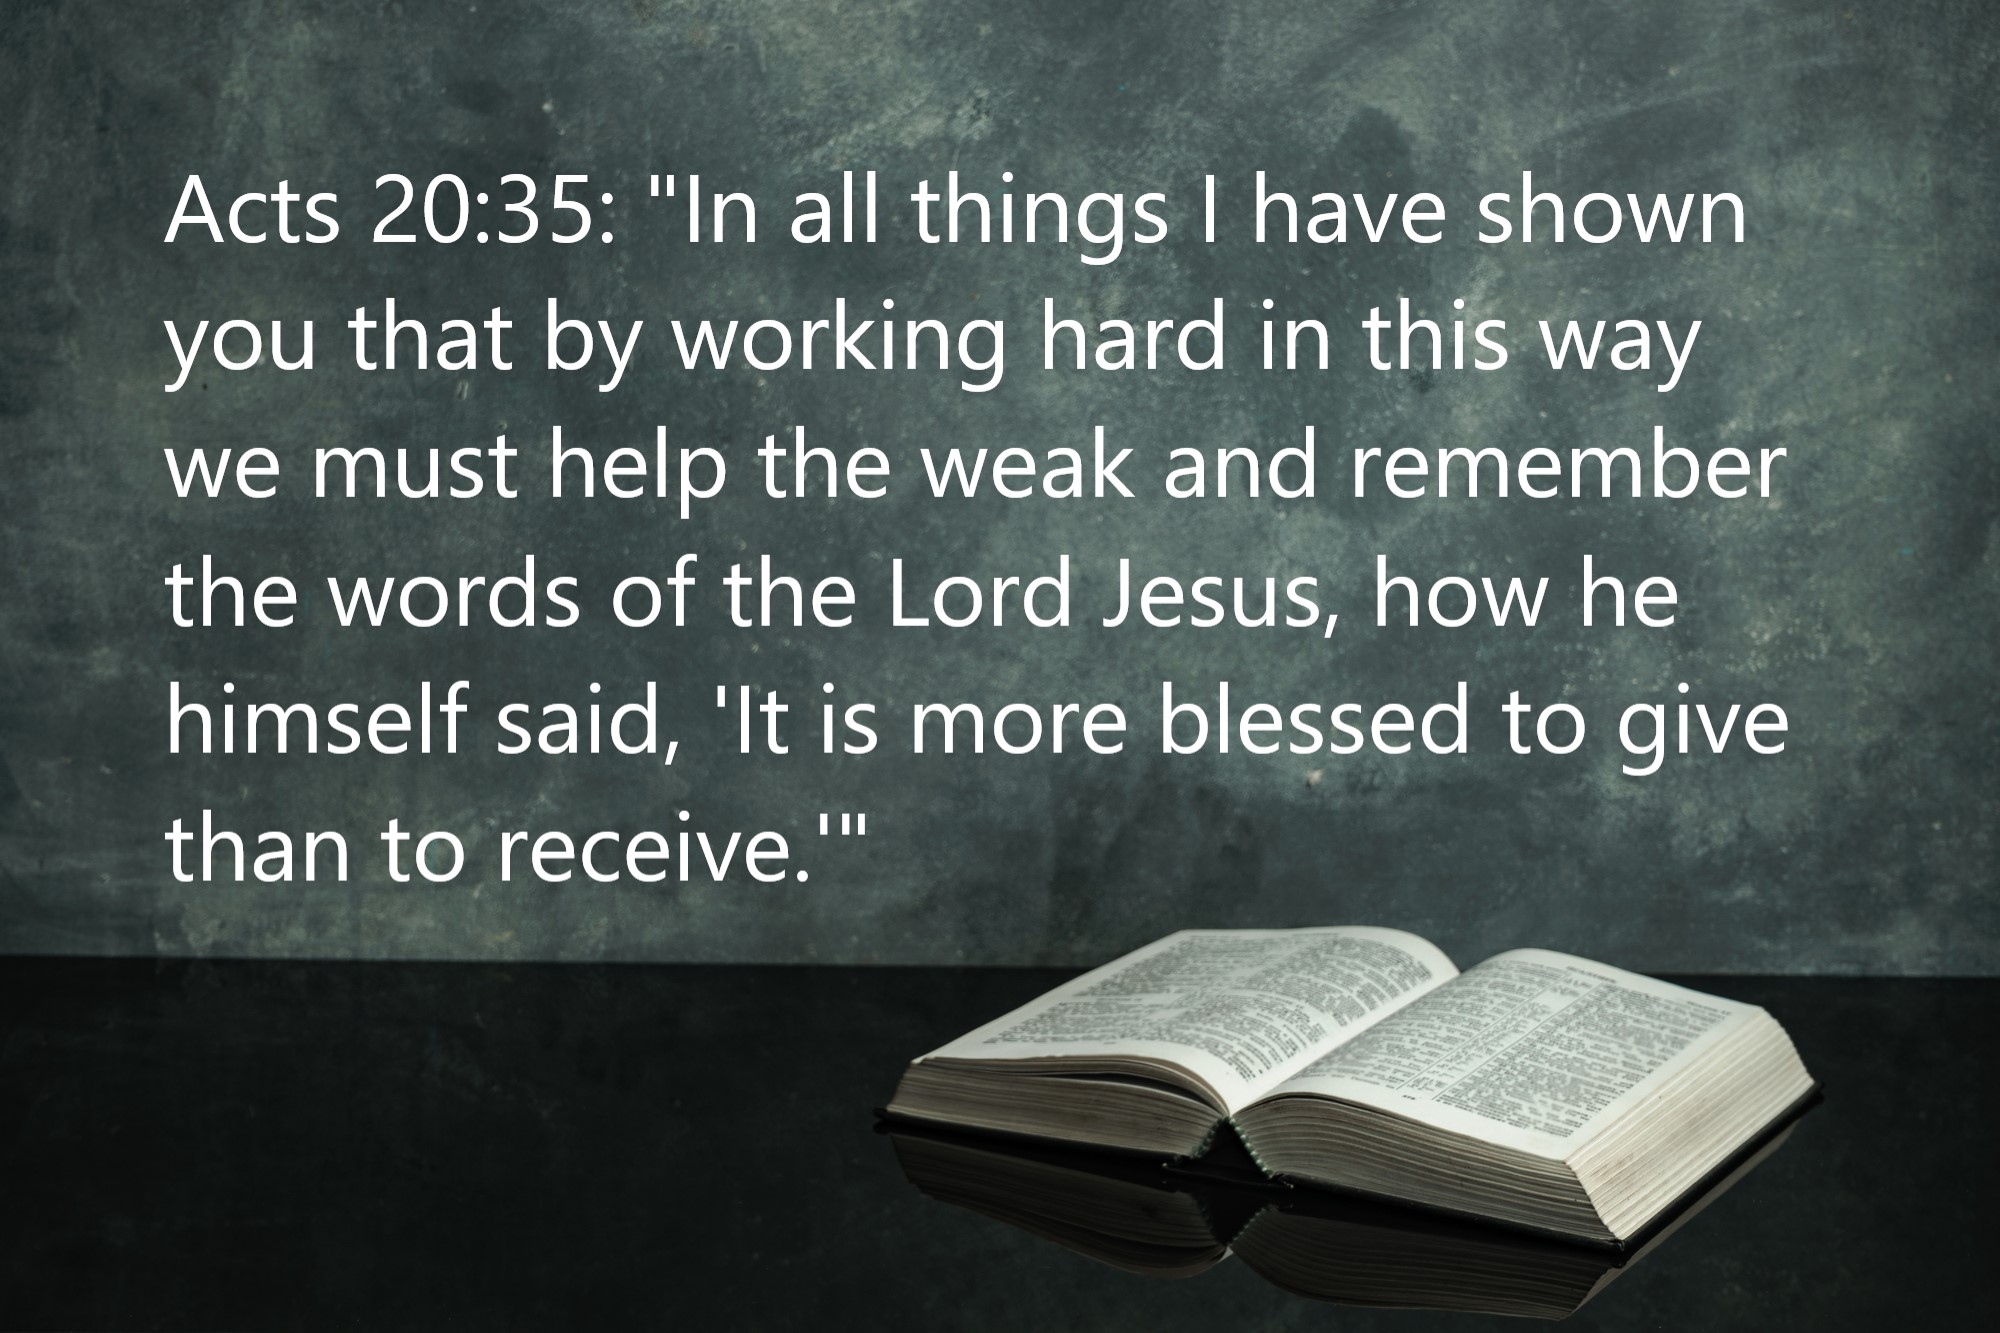 Acts 20:35: "In all things I have shown you that by working hard in this way we must help the weak and remember the words of the Lord Jesus, how he himself said, 'It is more blessed to give than to receive.'"